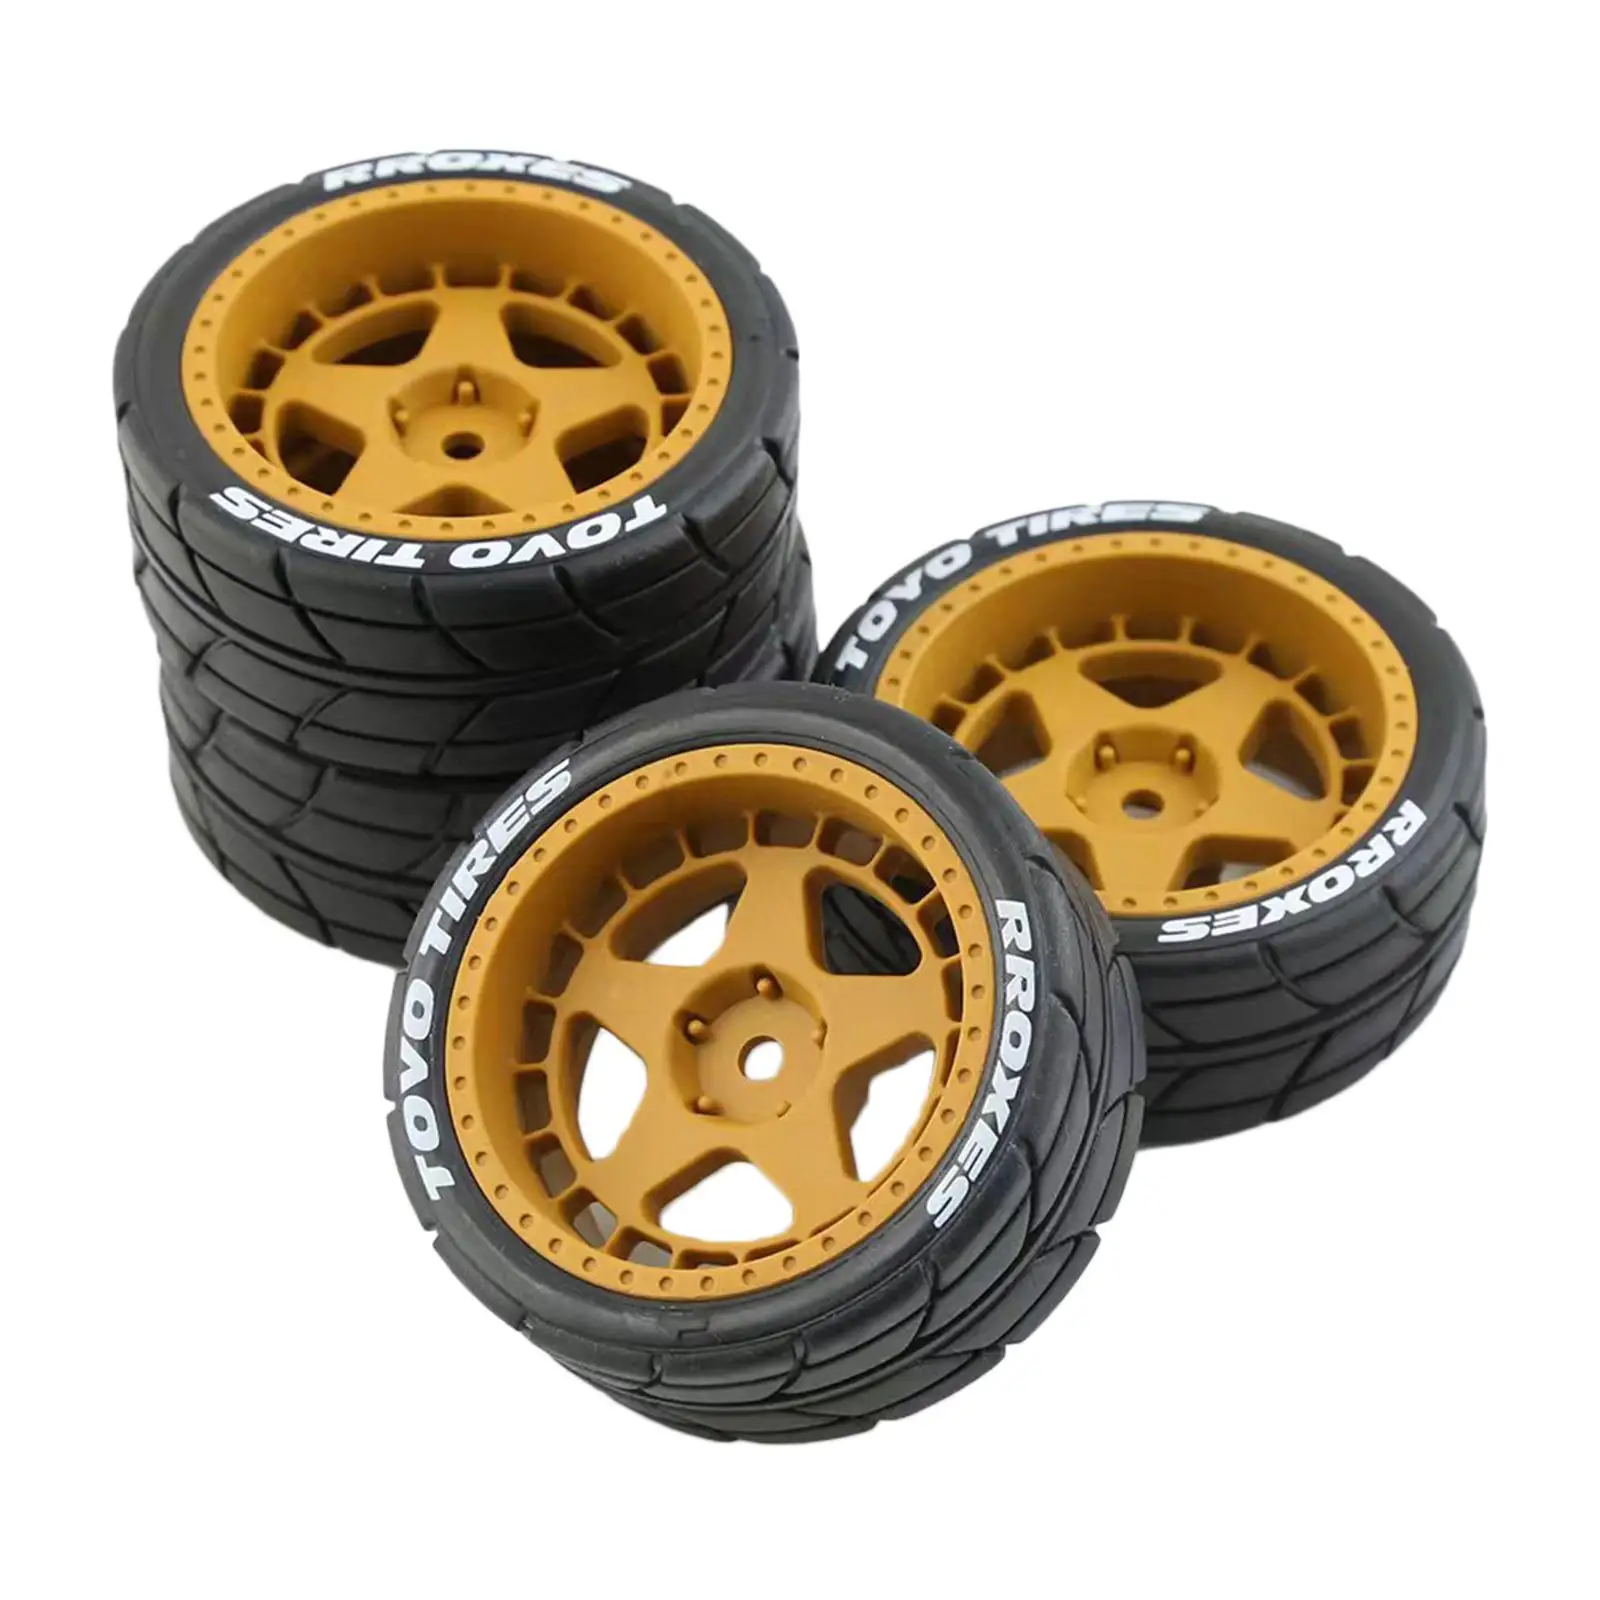 4x RC Rally  Tyres 12mm Hub  Replacement for TT02 XV01 1:10  Road Touring Car Parts